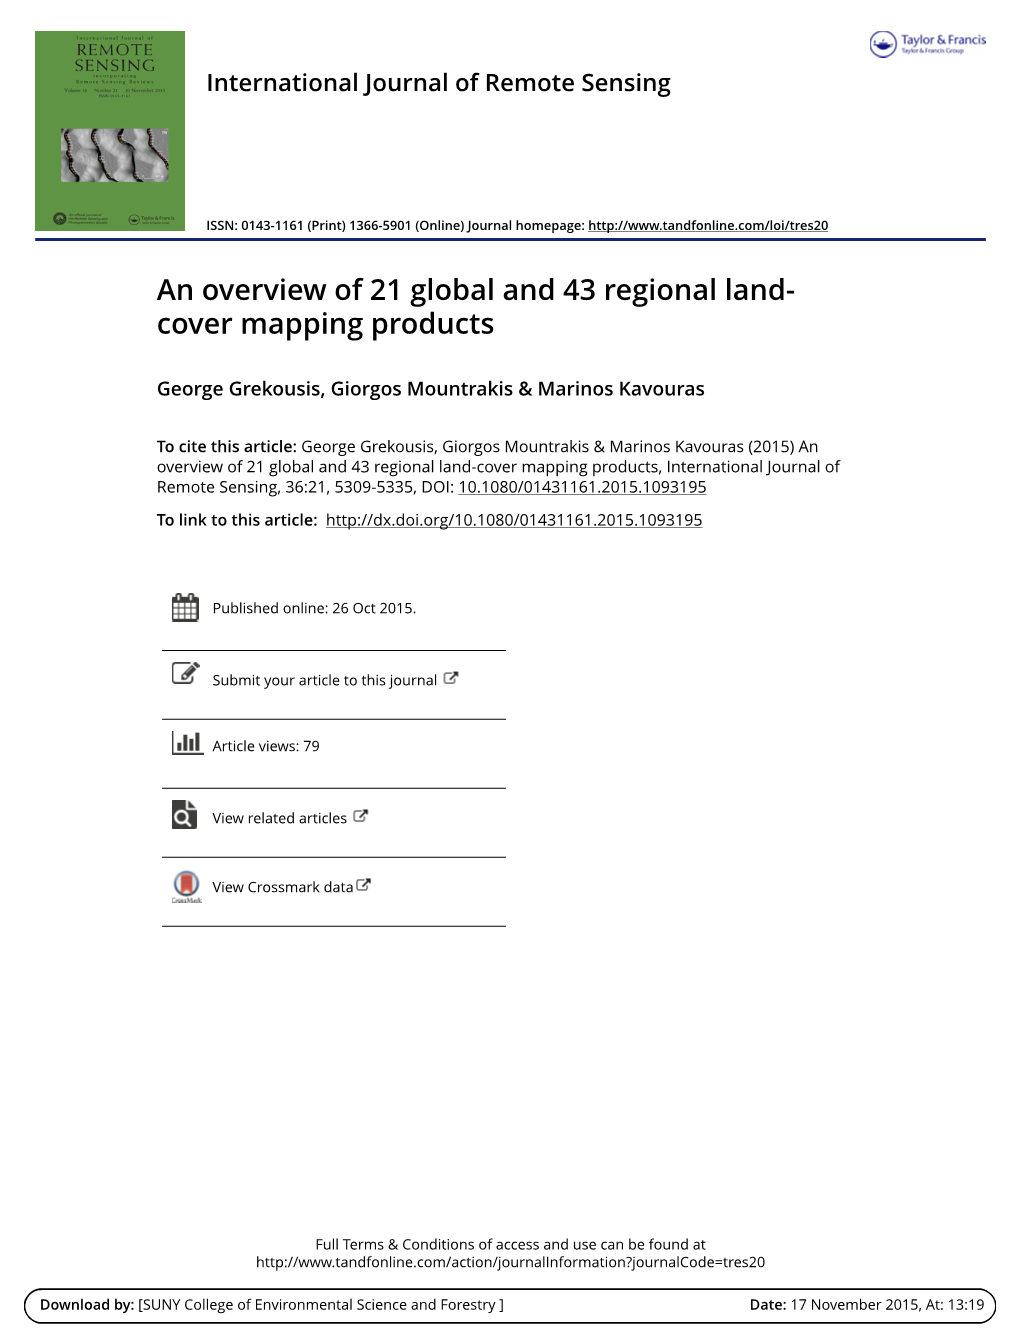 An Overview of 21 Global and 43 Regional Land-Cover Mapping Products, International Journal of Remote Sensing, 36:21, 5309-5335, DOI: 10.1080/01431161.2015.1093195